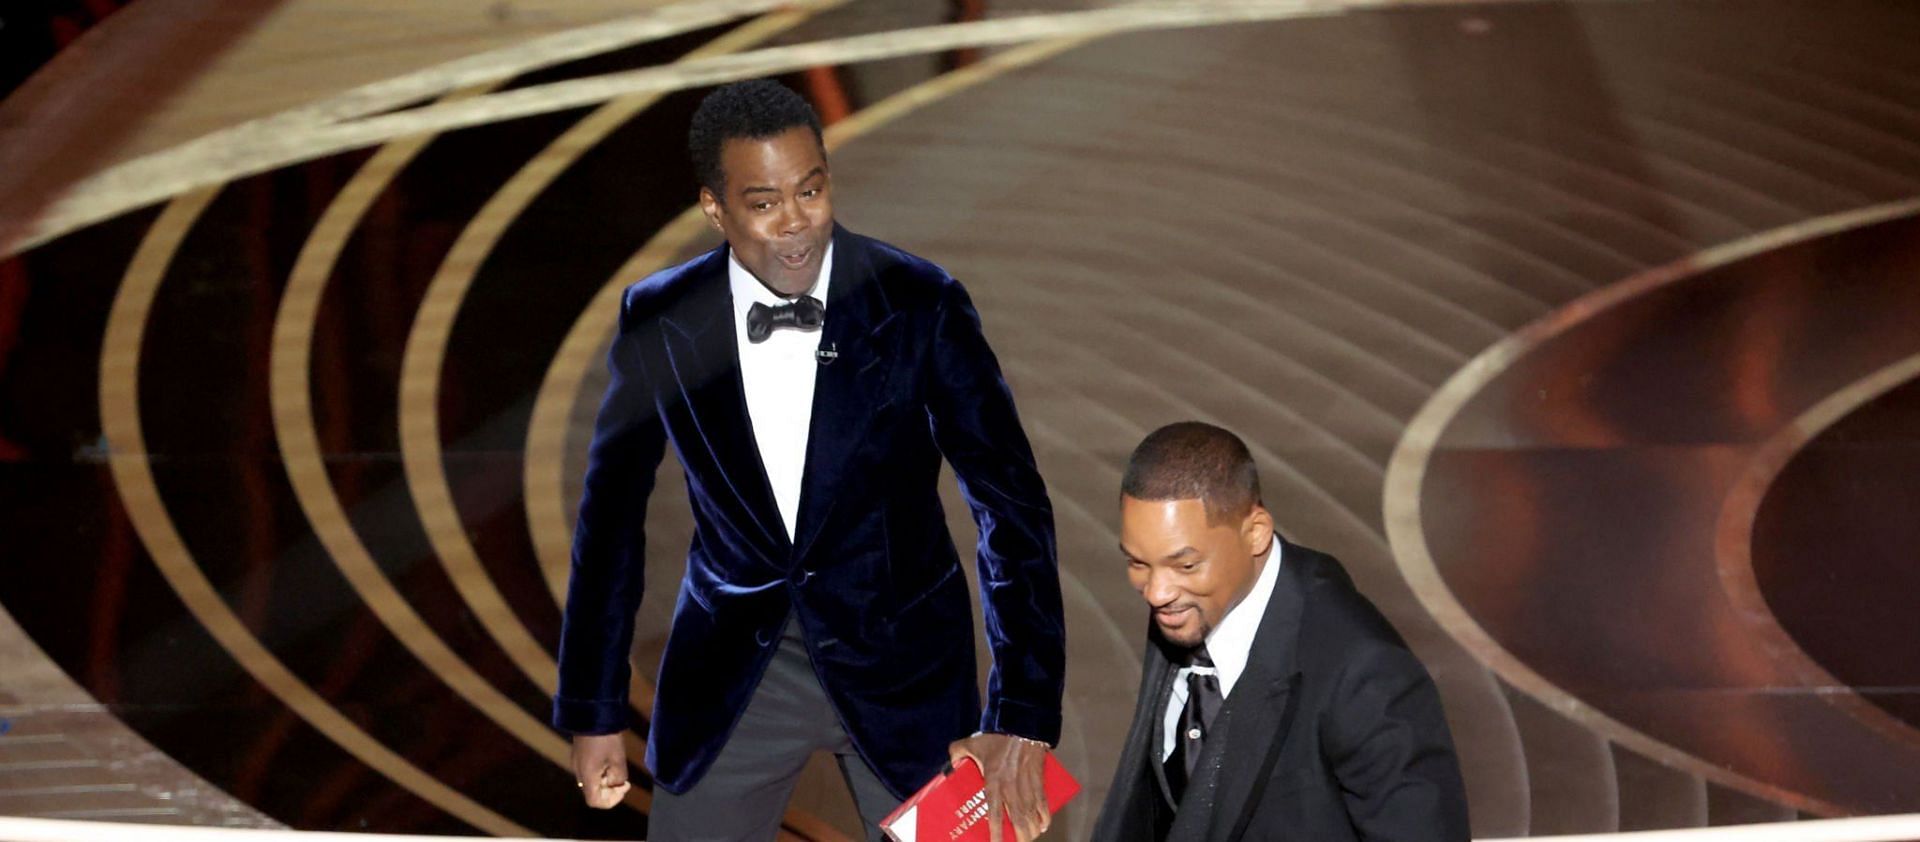 Will Smith and Chris Rock headed to separate afterparties after the slapping incident (Image via Myung Chun/Getty Images)